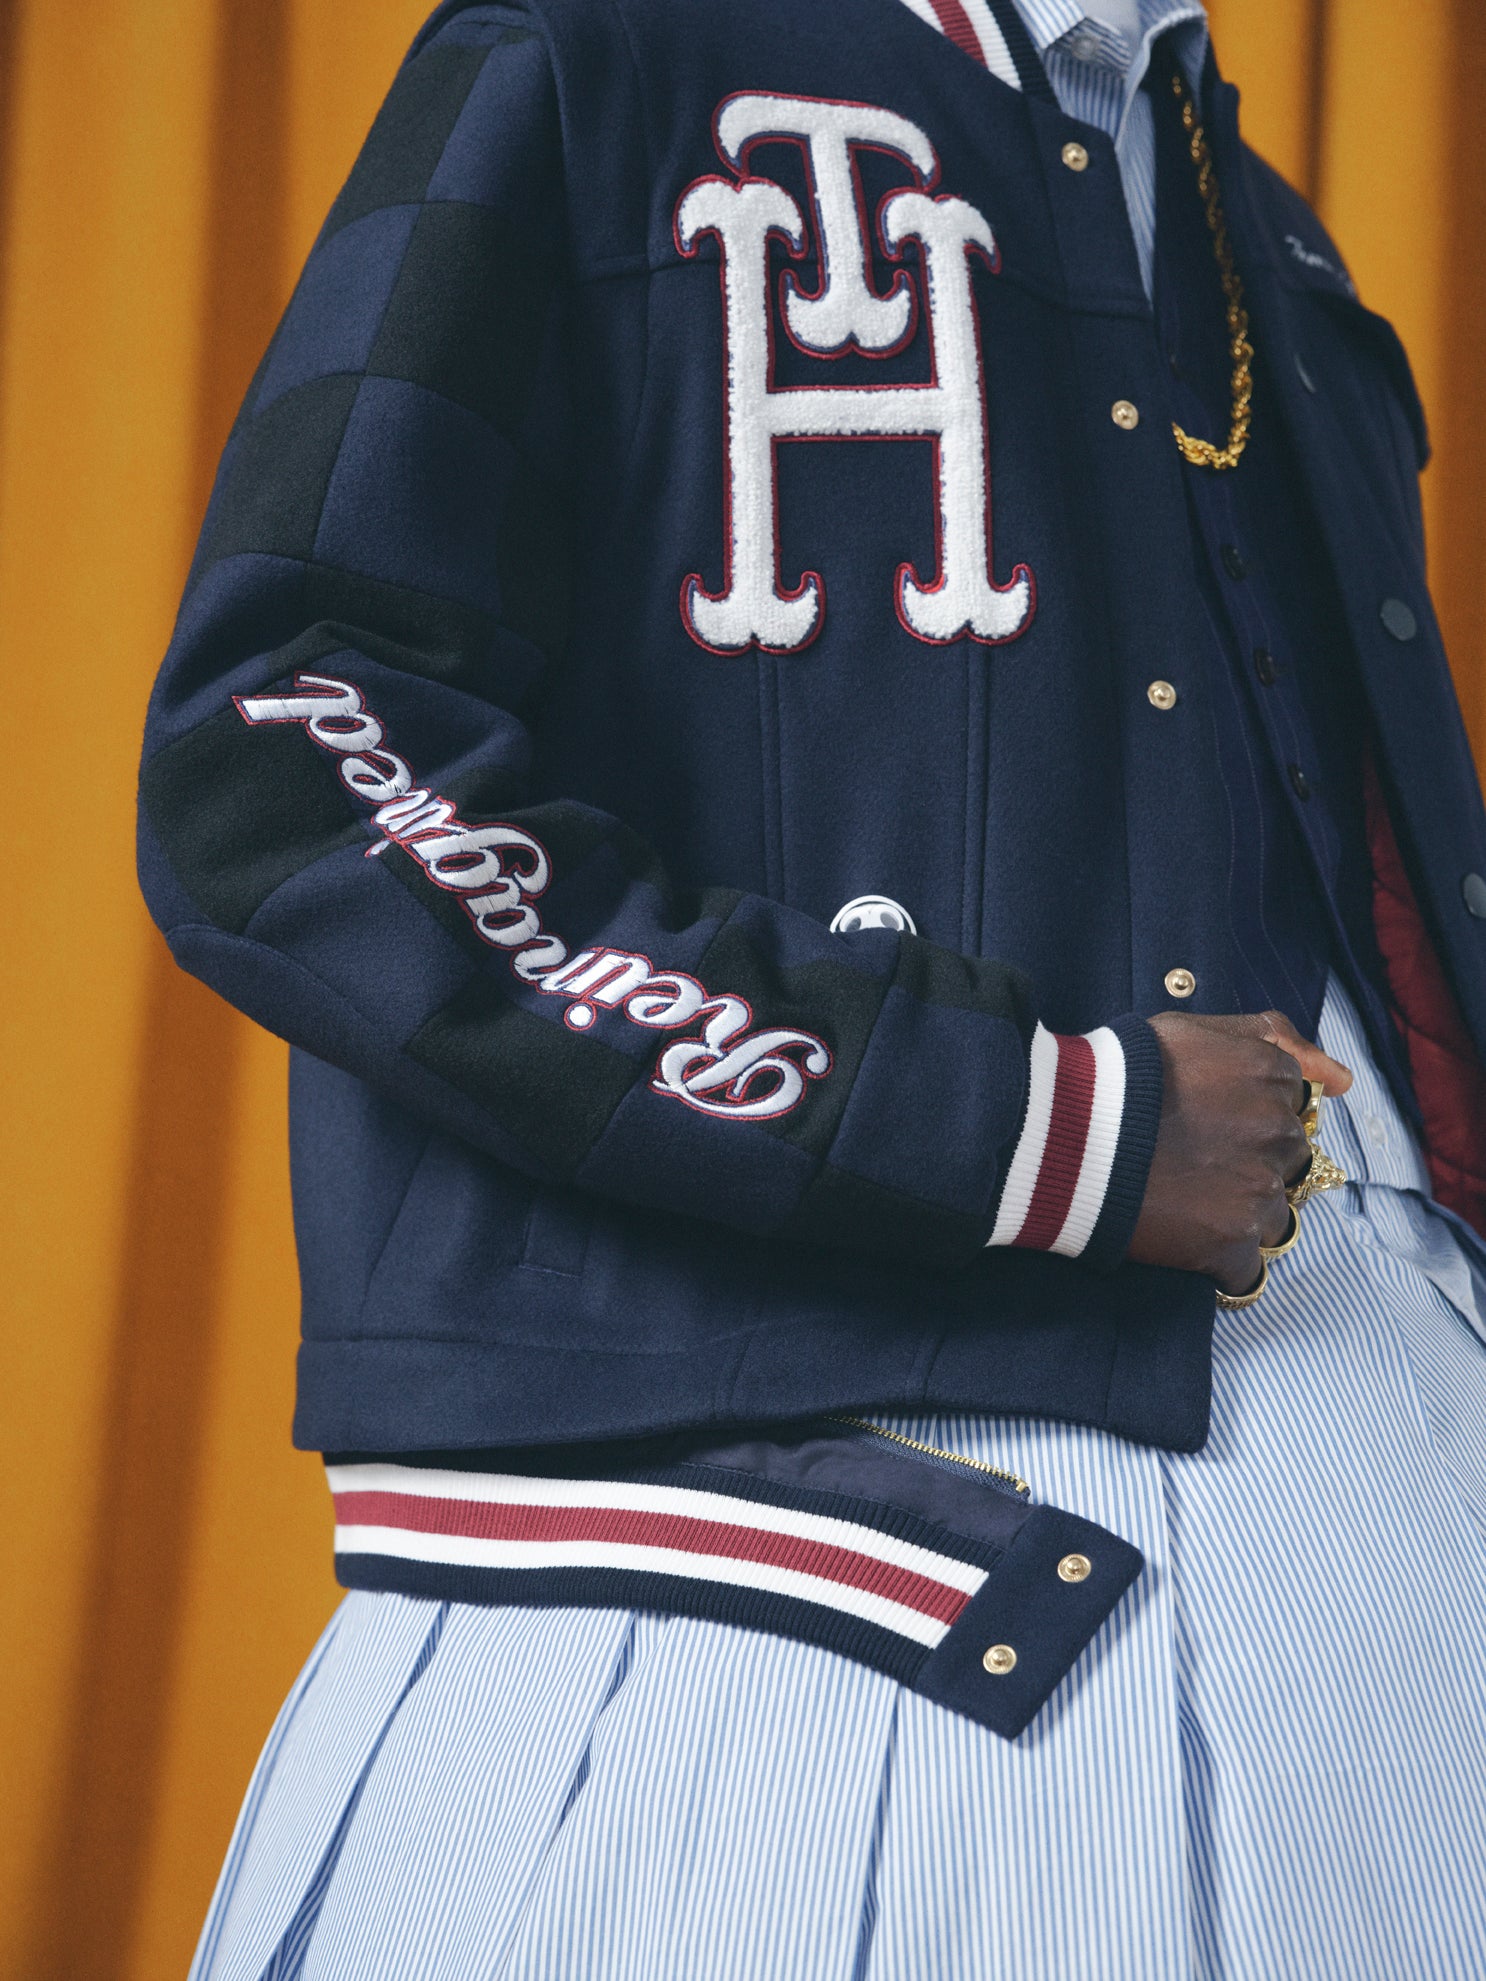 Tommy Hilfiger And Harlem’s Fashion Row Announce The Winning Designer Of The New Legacy Challenge